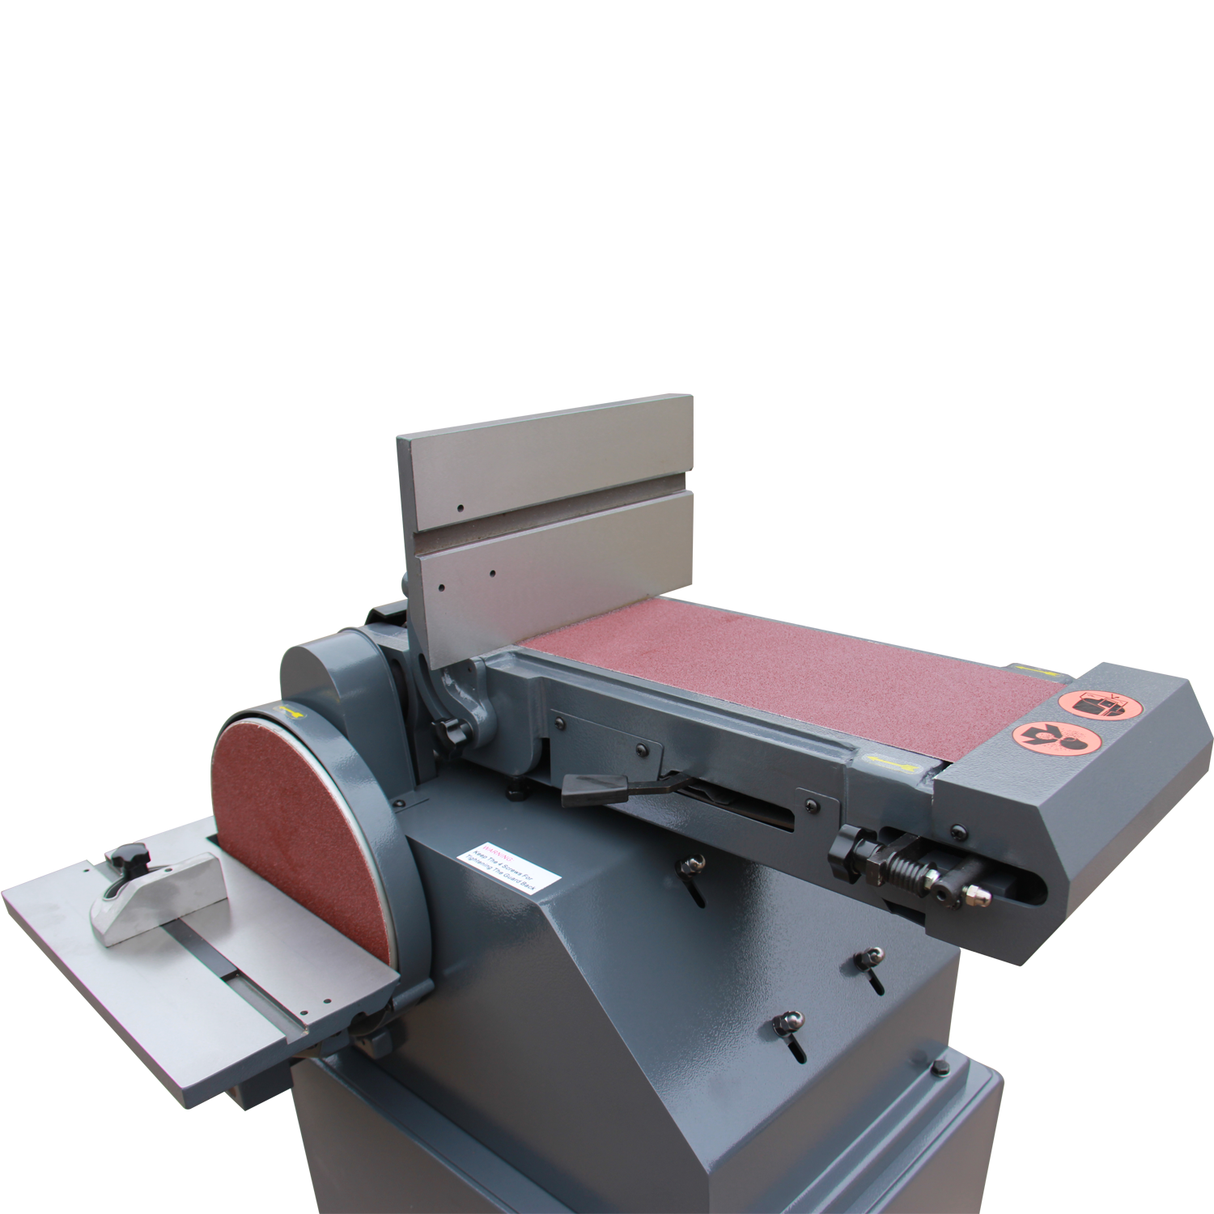 Versatile Design: The belt sander can be used horizontally and vertically, making it perfect for a variety of projects.